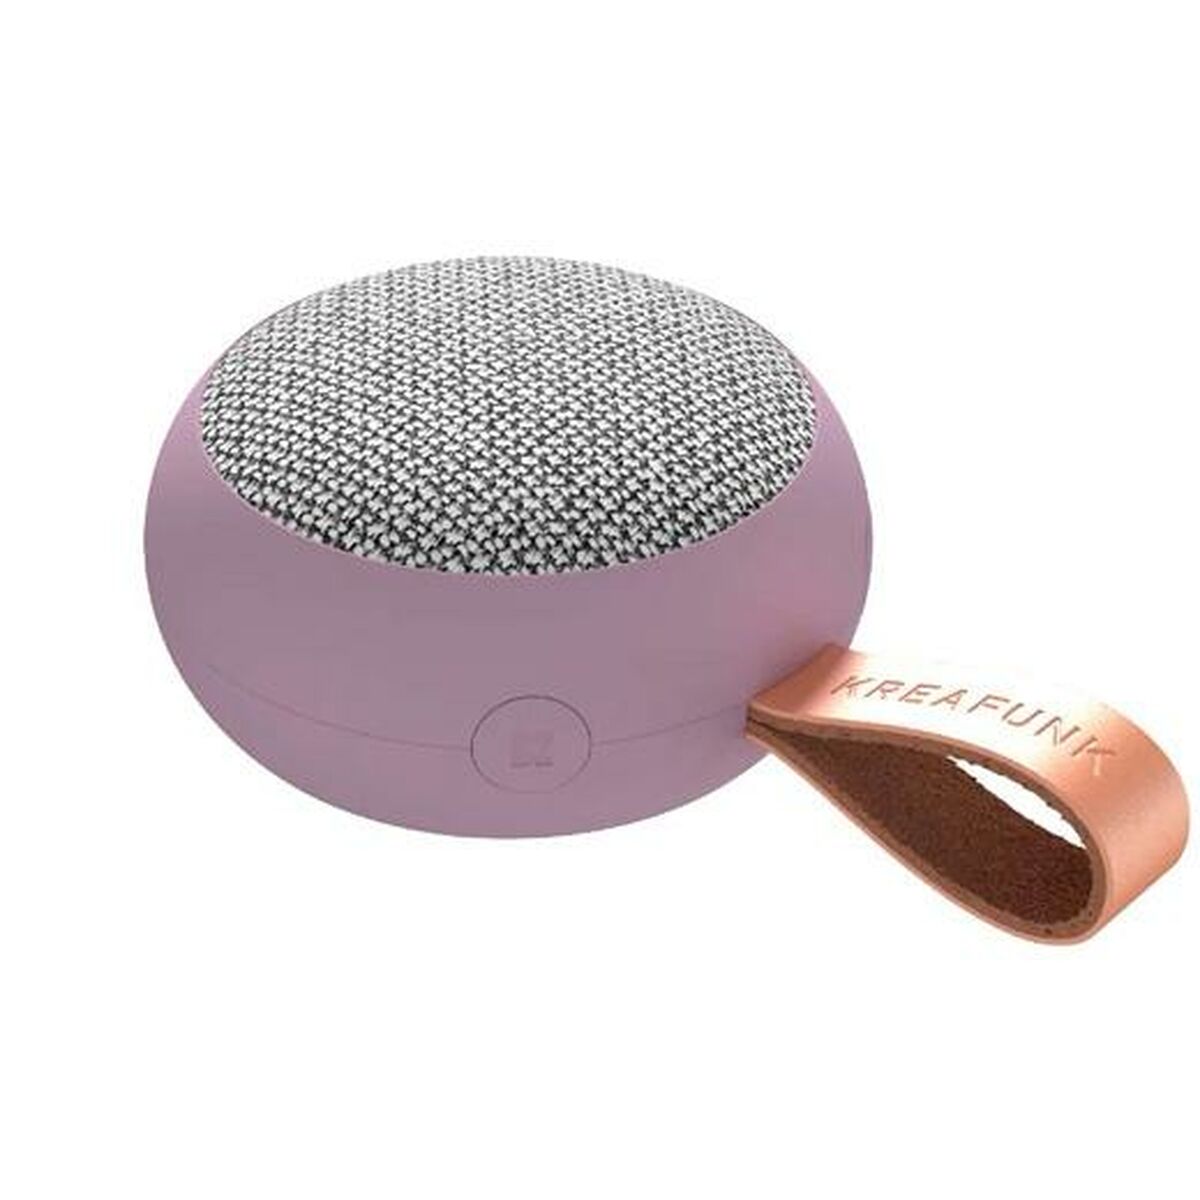 Portable Bluetooth Speakers Kreafunk Purple 6 W, Kreafunk, Electronics, Mobile communication and accessories, portable-bluetooth-speakers-kreafunk-purple-6-w, Brand_Kreafunk, category-reference-2609, category-reference-2882, category-reference-2923, category-reference-t-19653, category-reference-t-21311, category-reference-t-4036, category-reference-t-4037, Condition_NEW, entertainment, music, office, Price_50 - 100, telephones & tablets, wifi y bluetooth, RiotNook